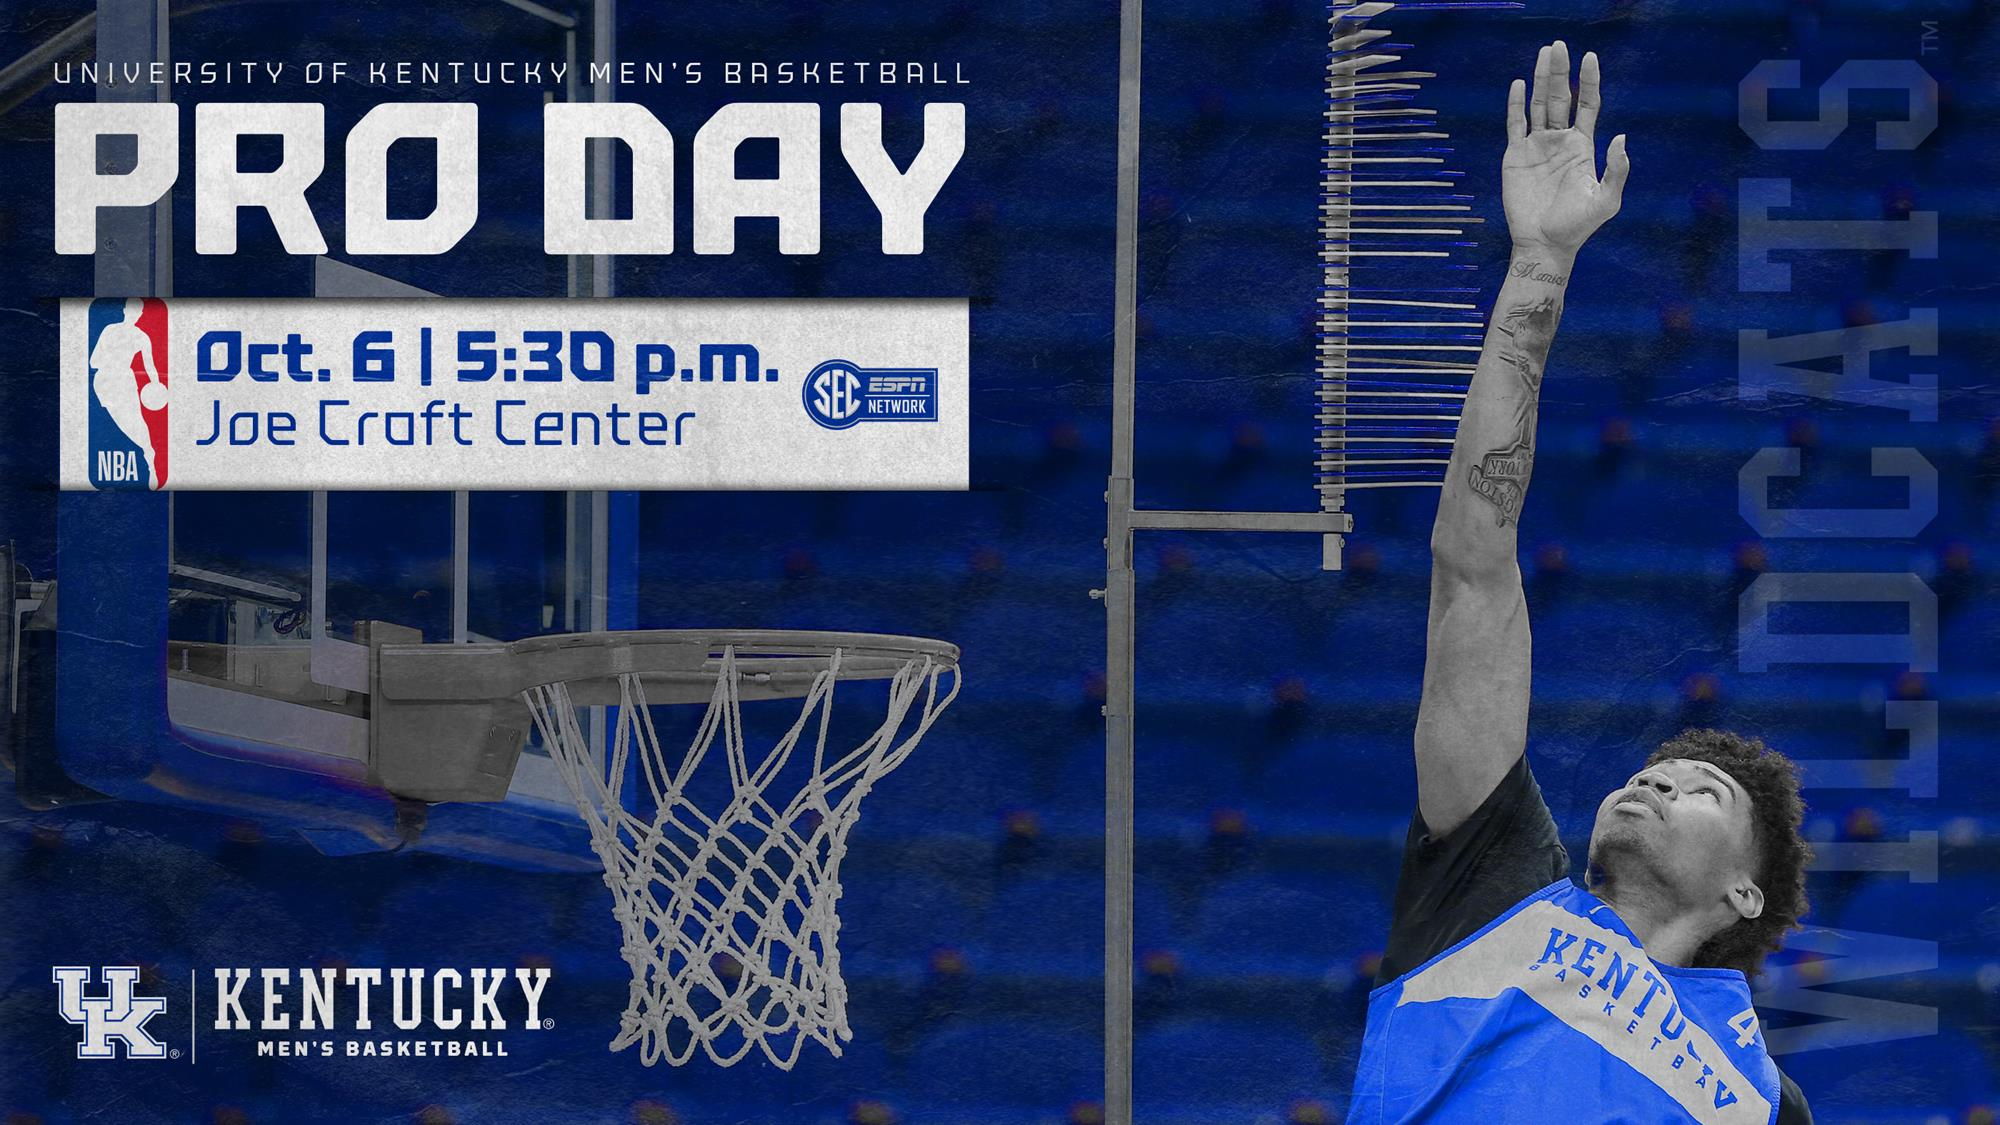 UK Men’s Basketball Pro Day Set for Oct. 6 at the Craft Center